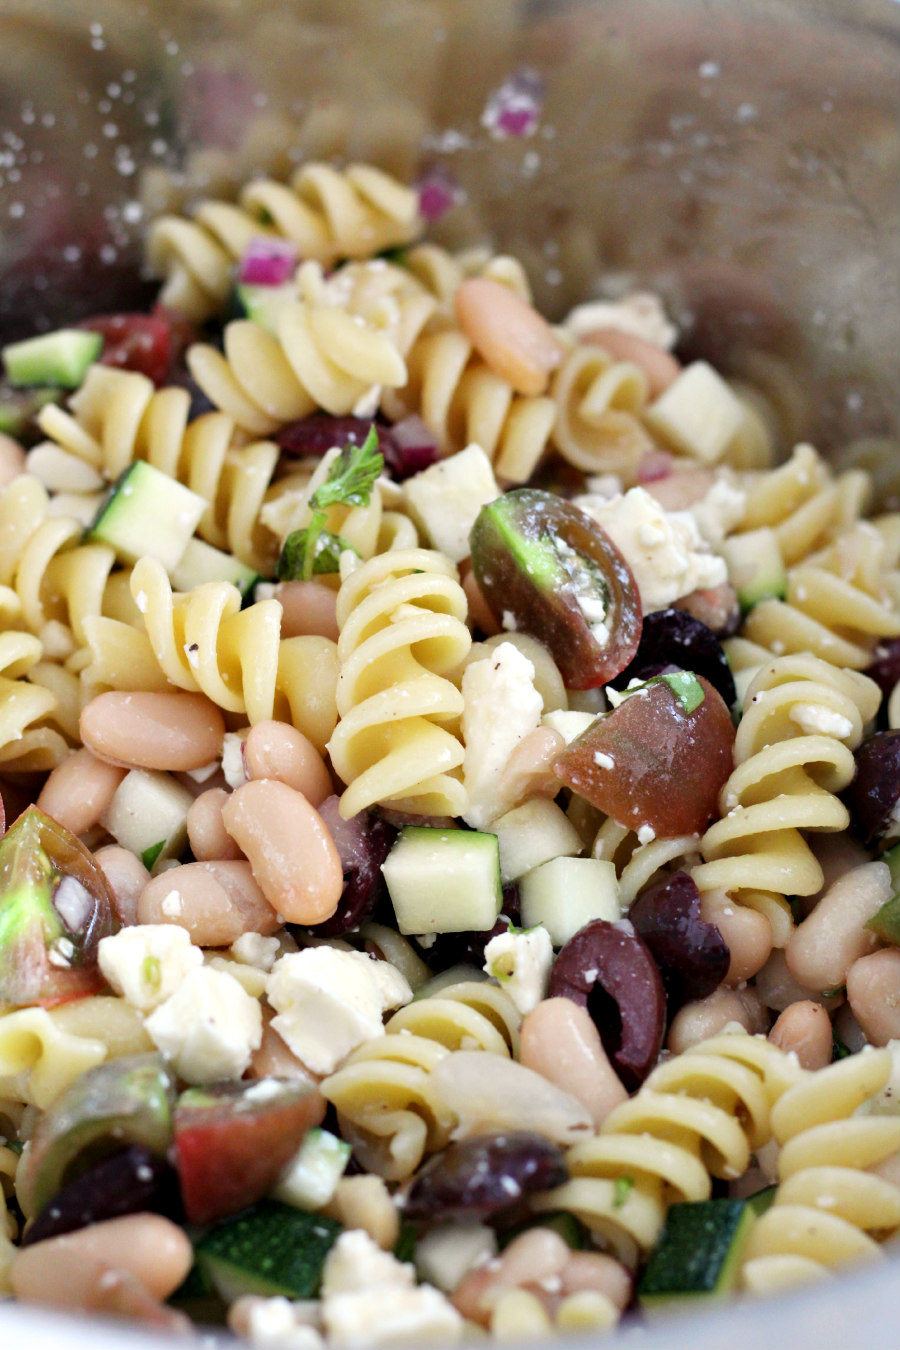 Rotini pasta, cannellini beans, red onion, basil, zucchini, cherry tomatoes, and kalamata olives, and crumbled feta cheese in a metal mixing bowl.